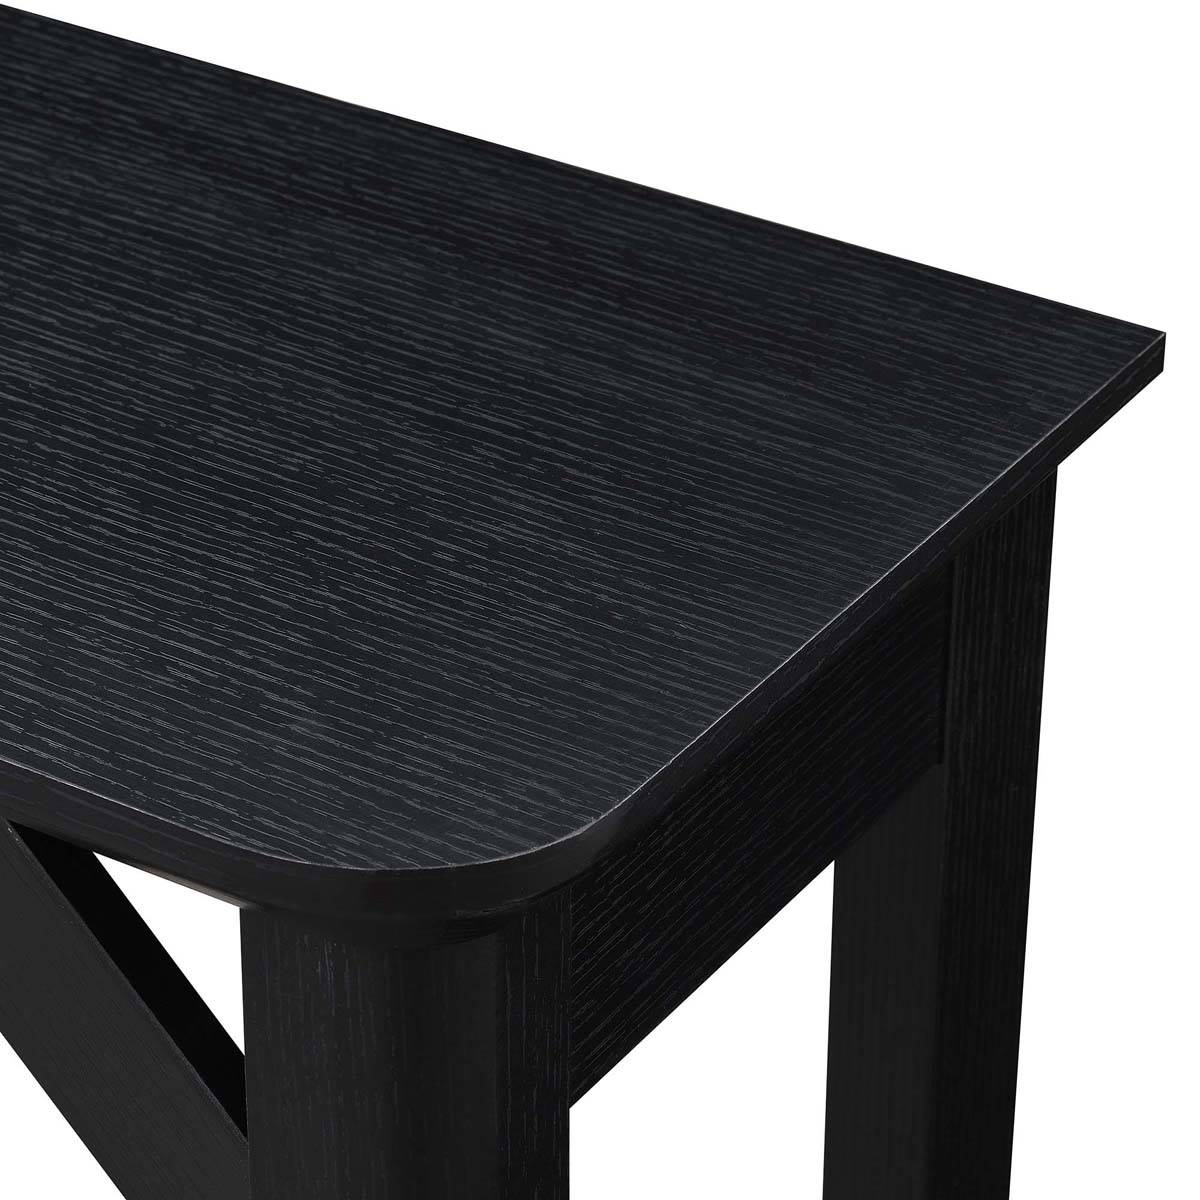 Convenience Concepts Winston Hall Table